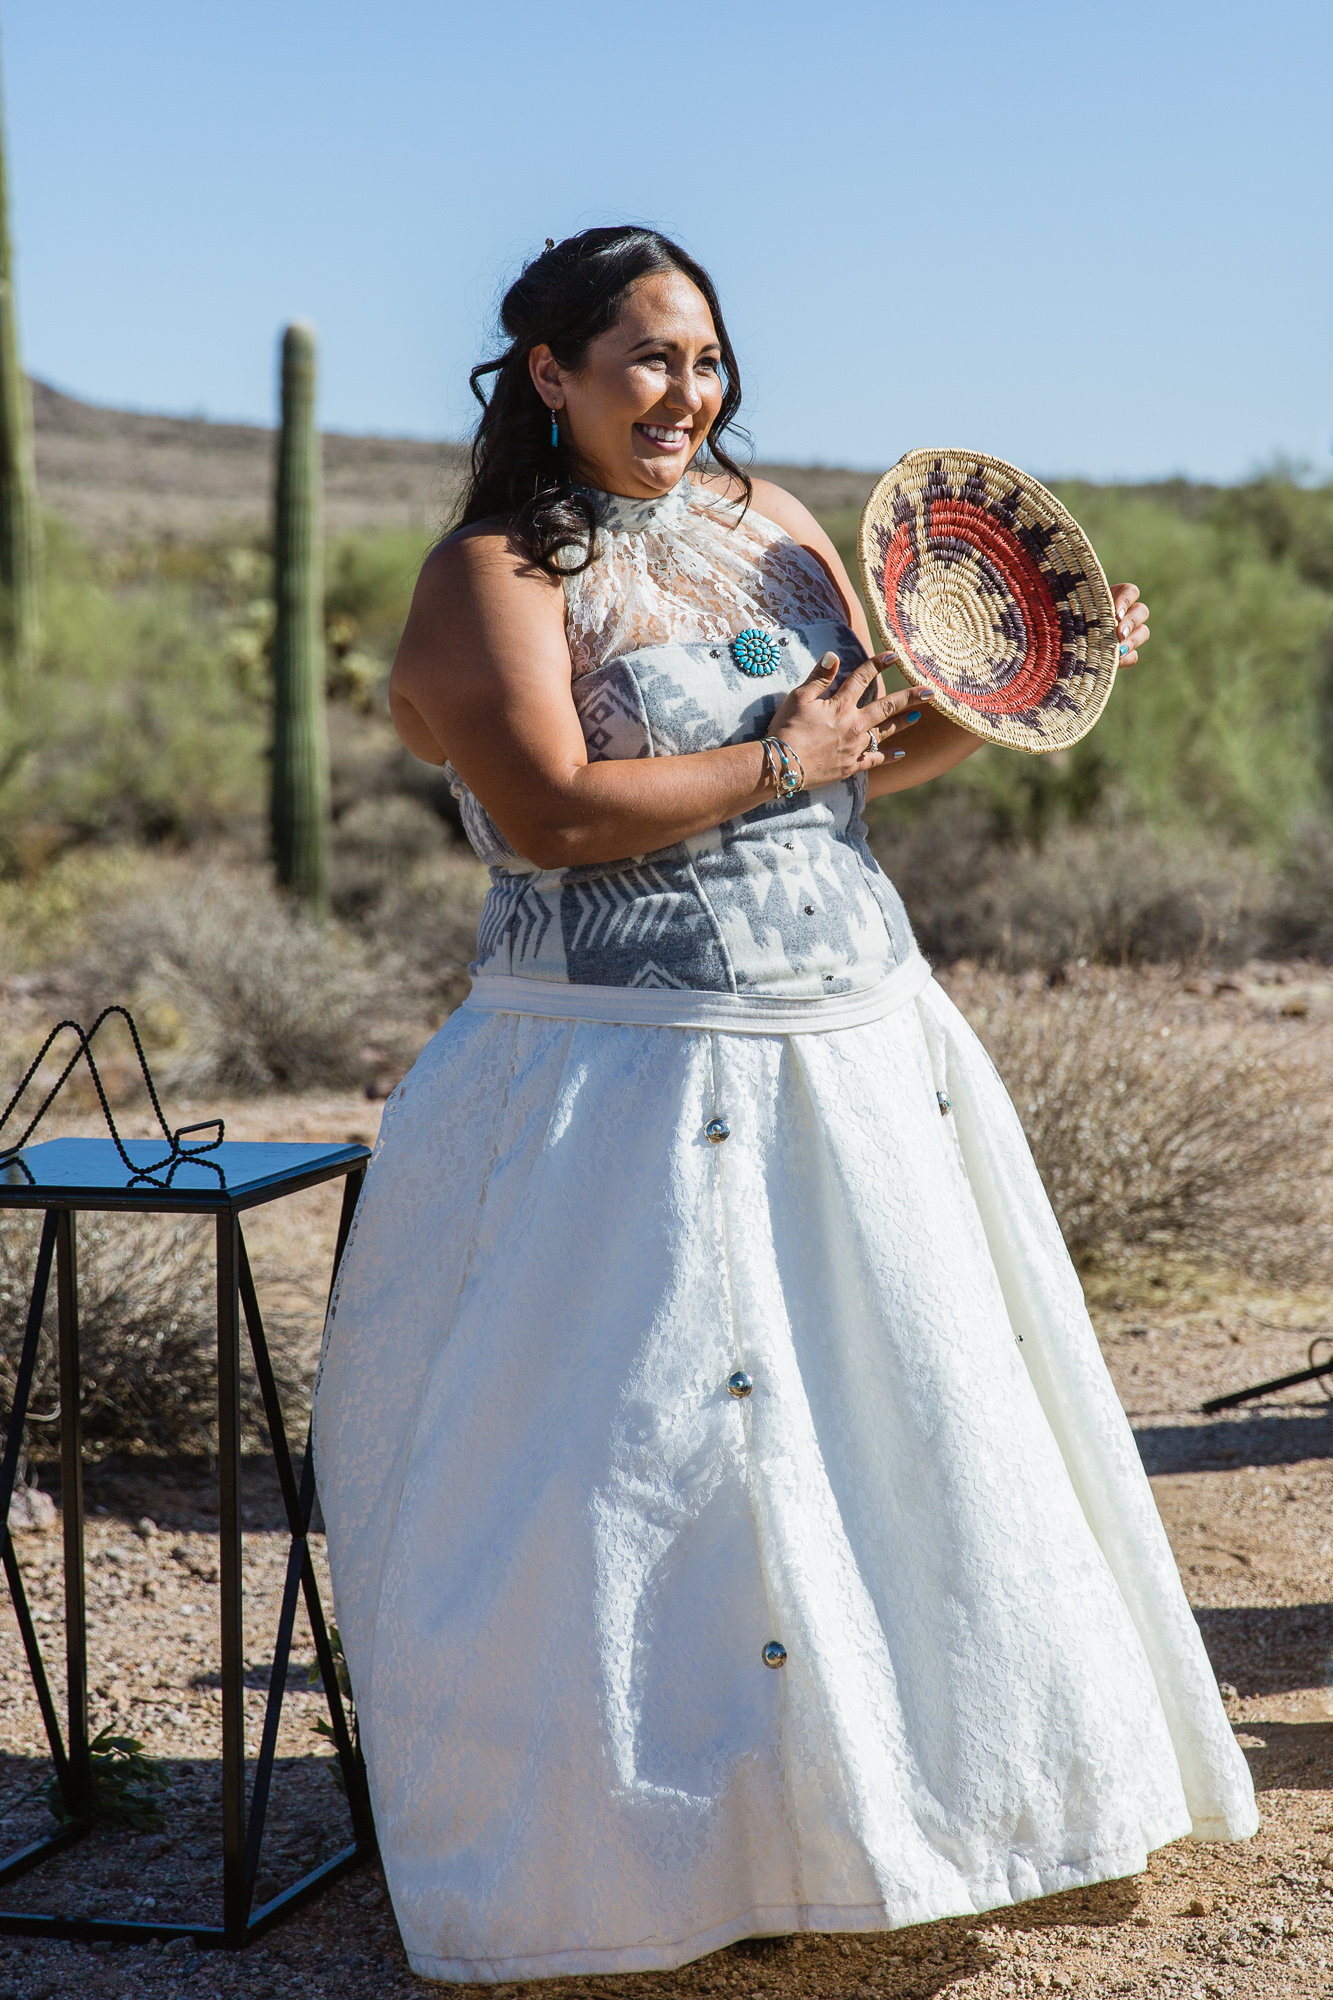 Bride with the Navajo wedding basket during a Lost Dutchman State Park wedding ceremony by Arizona wedding photographers PMA Photography.